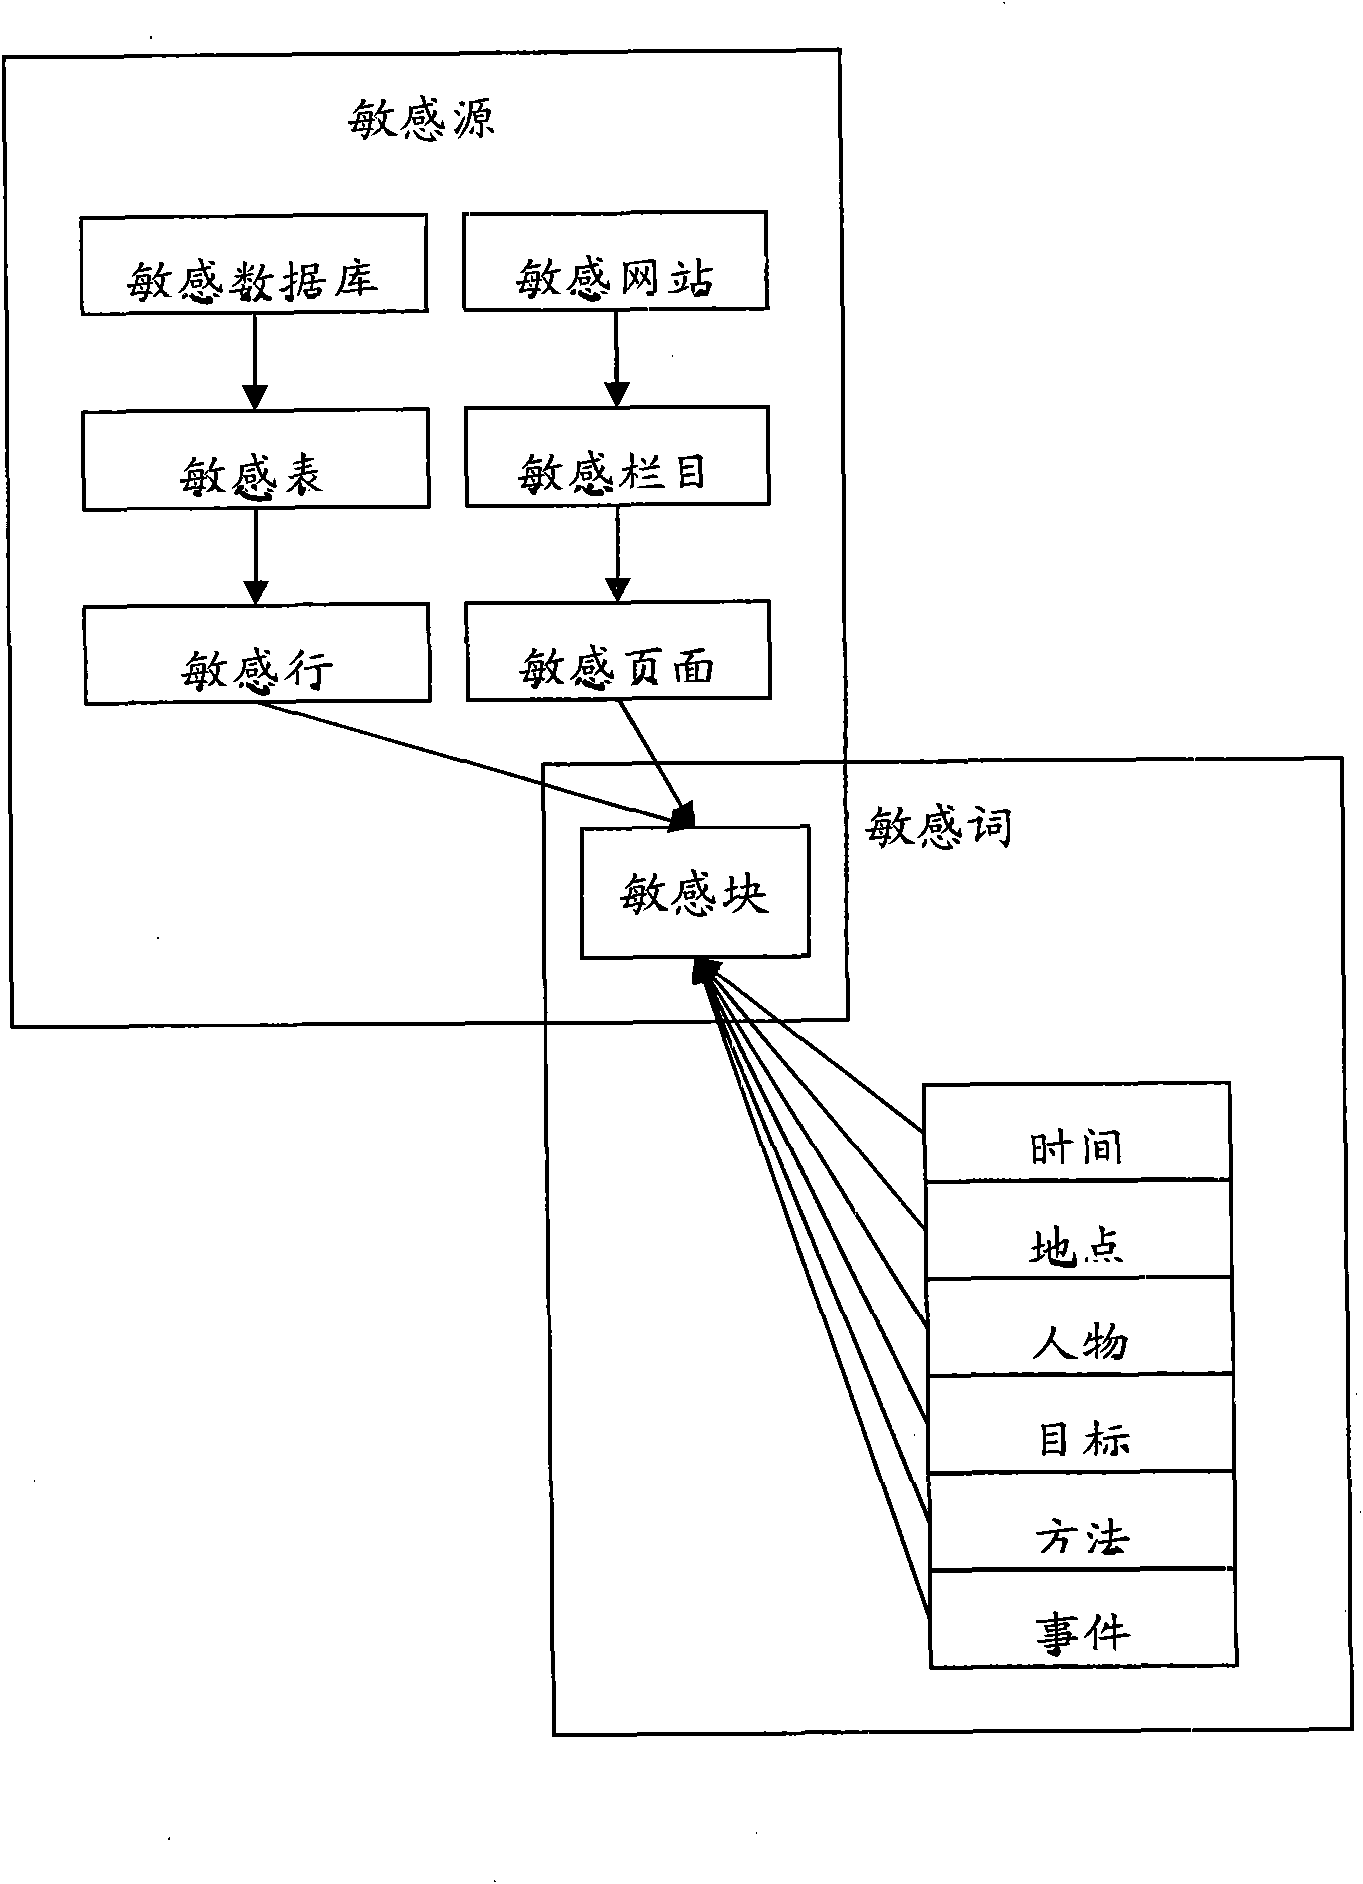 Sensitive information analysis system and method